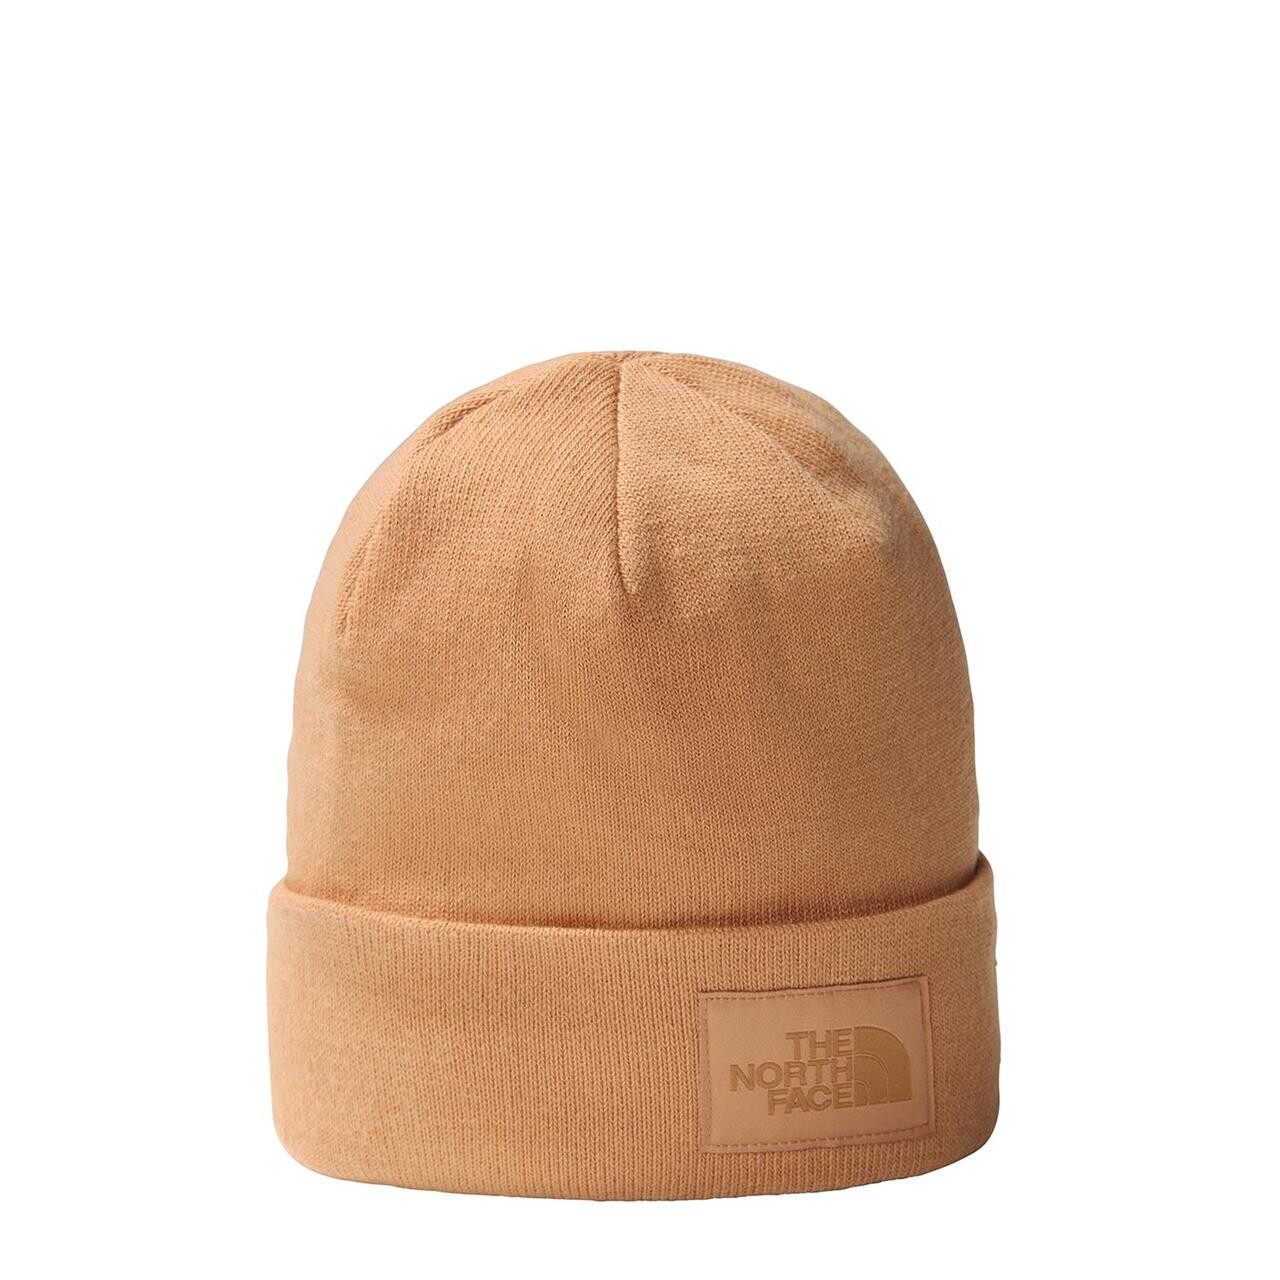 The North Face Dock Worker Recycled Beanie (Beige (ALMOND BUTTER) One size)